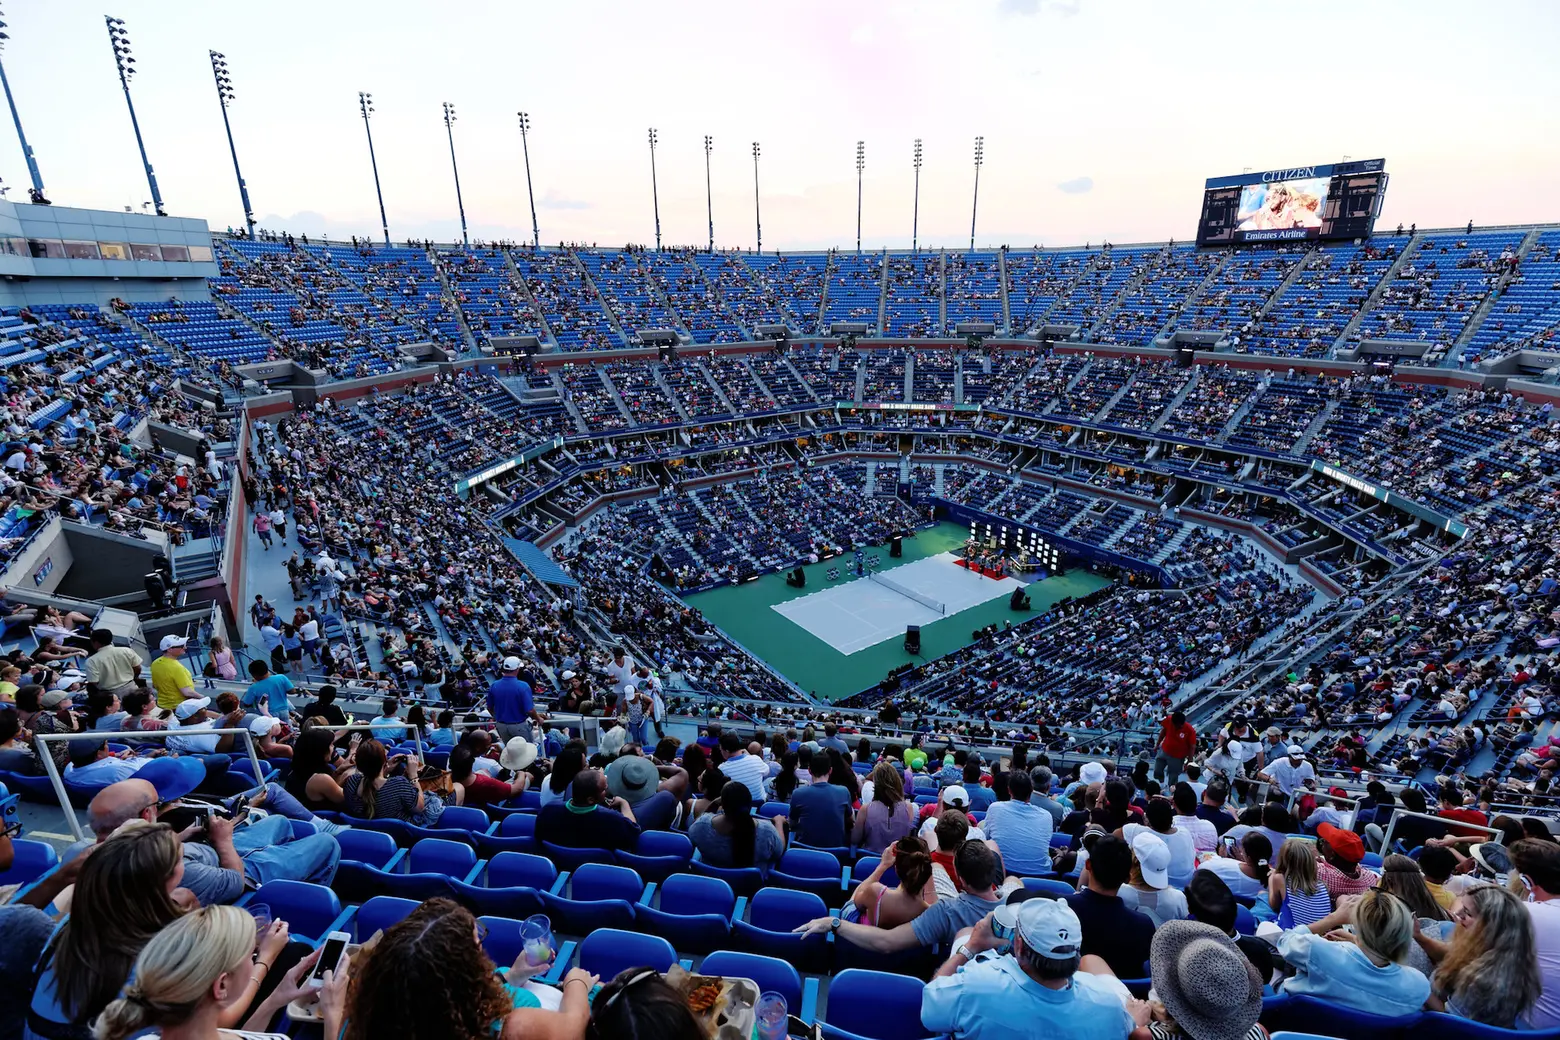 It’s U.S. Open time in NYC: What to know before you go